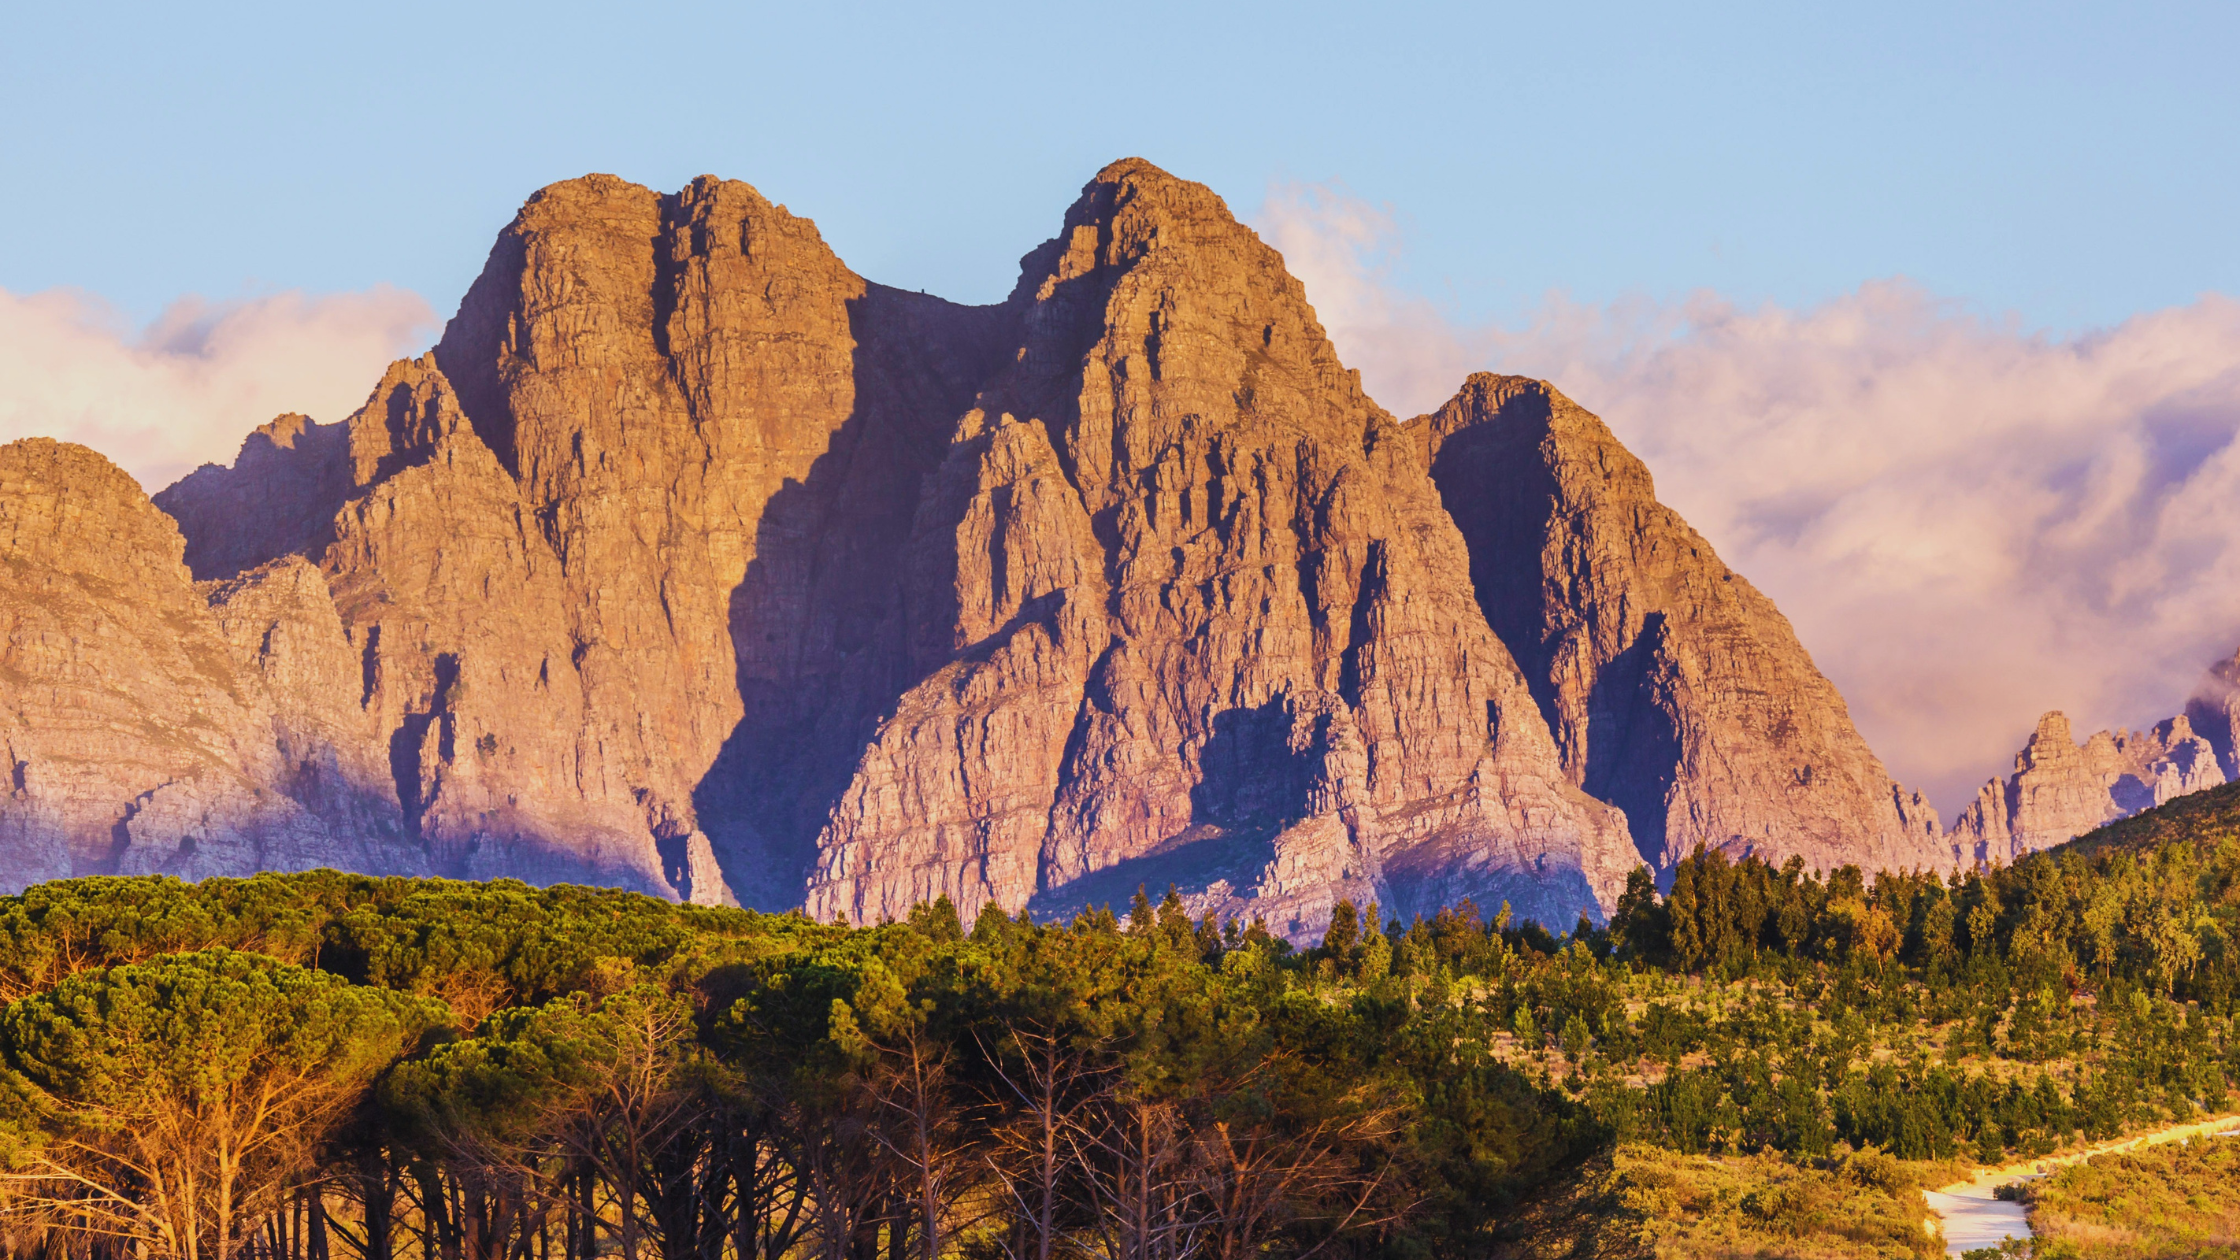 Panoramic image of the Stellenbosch mountains